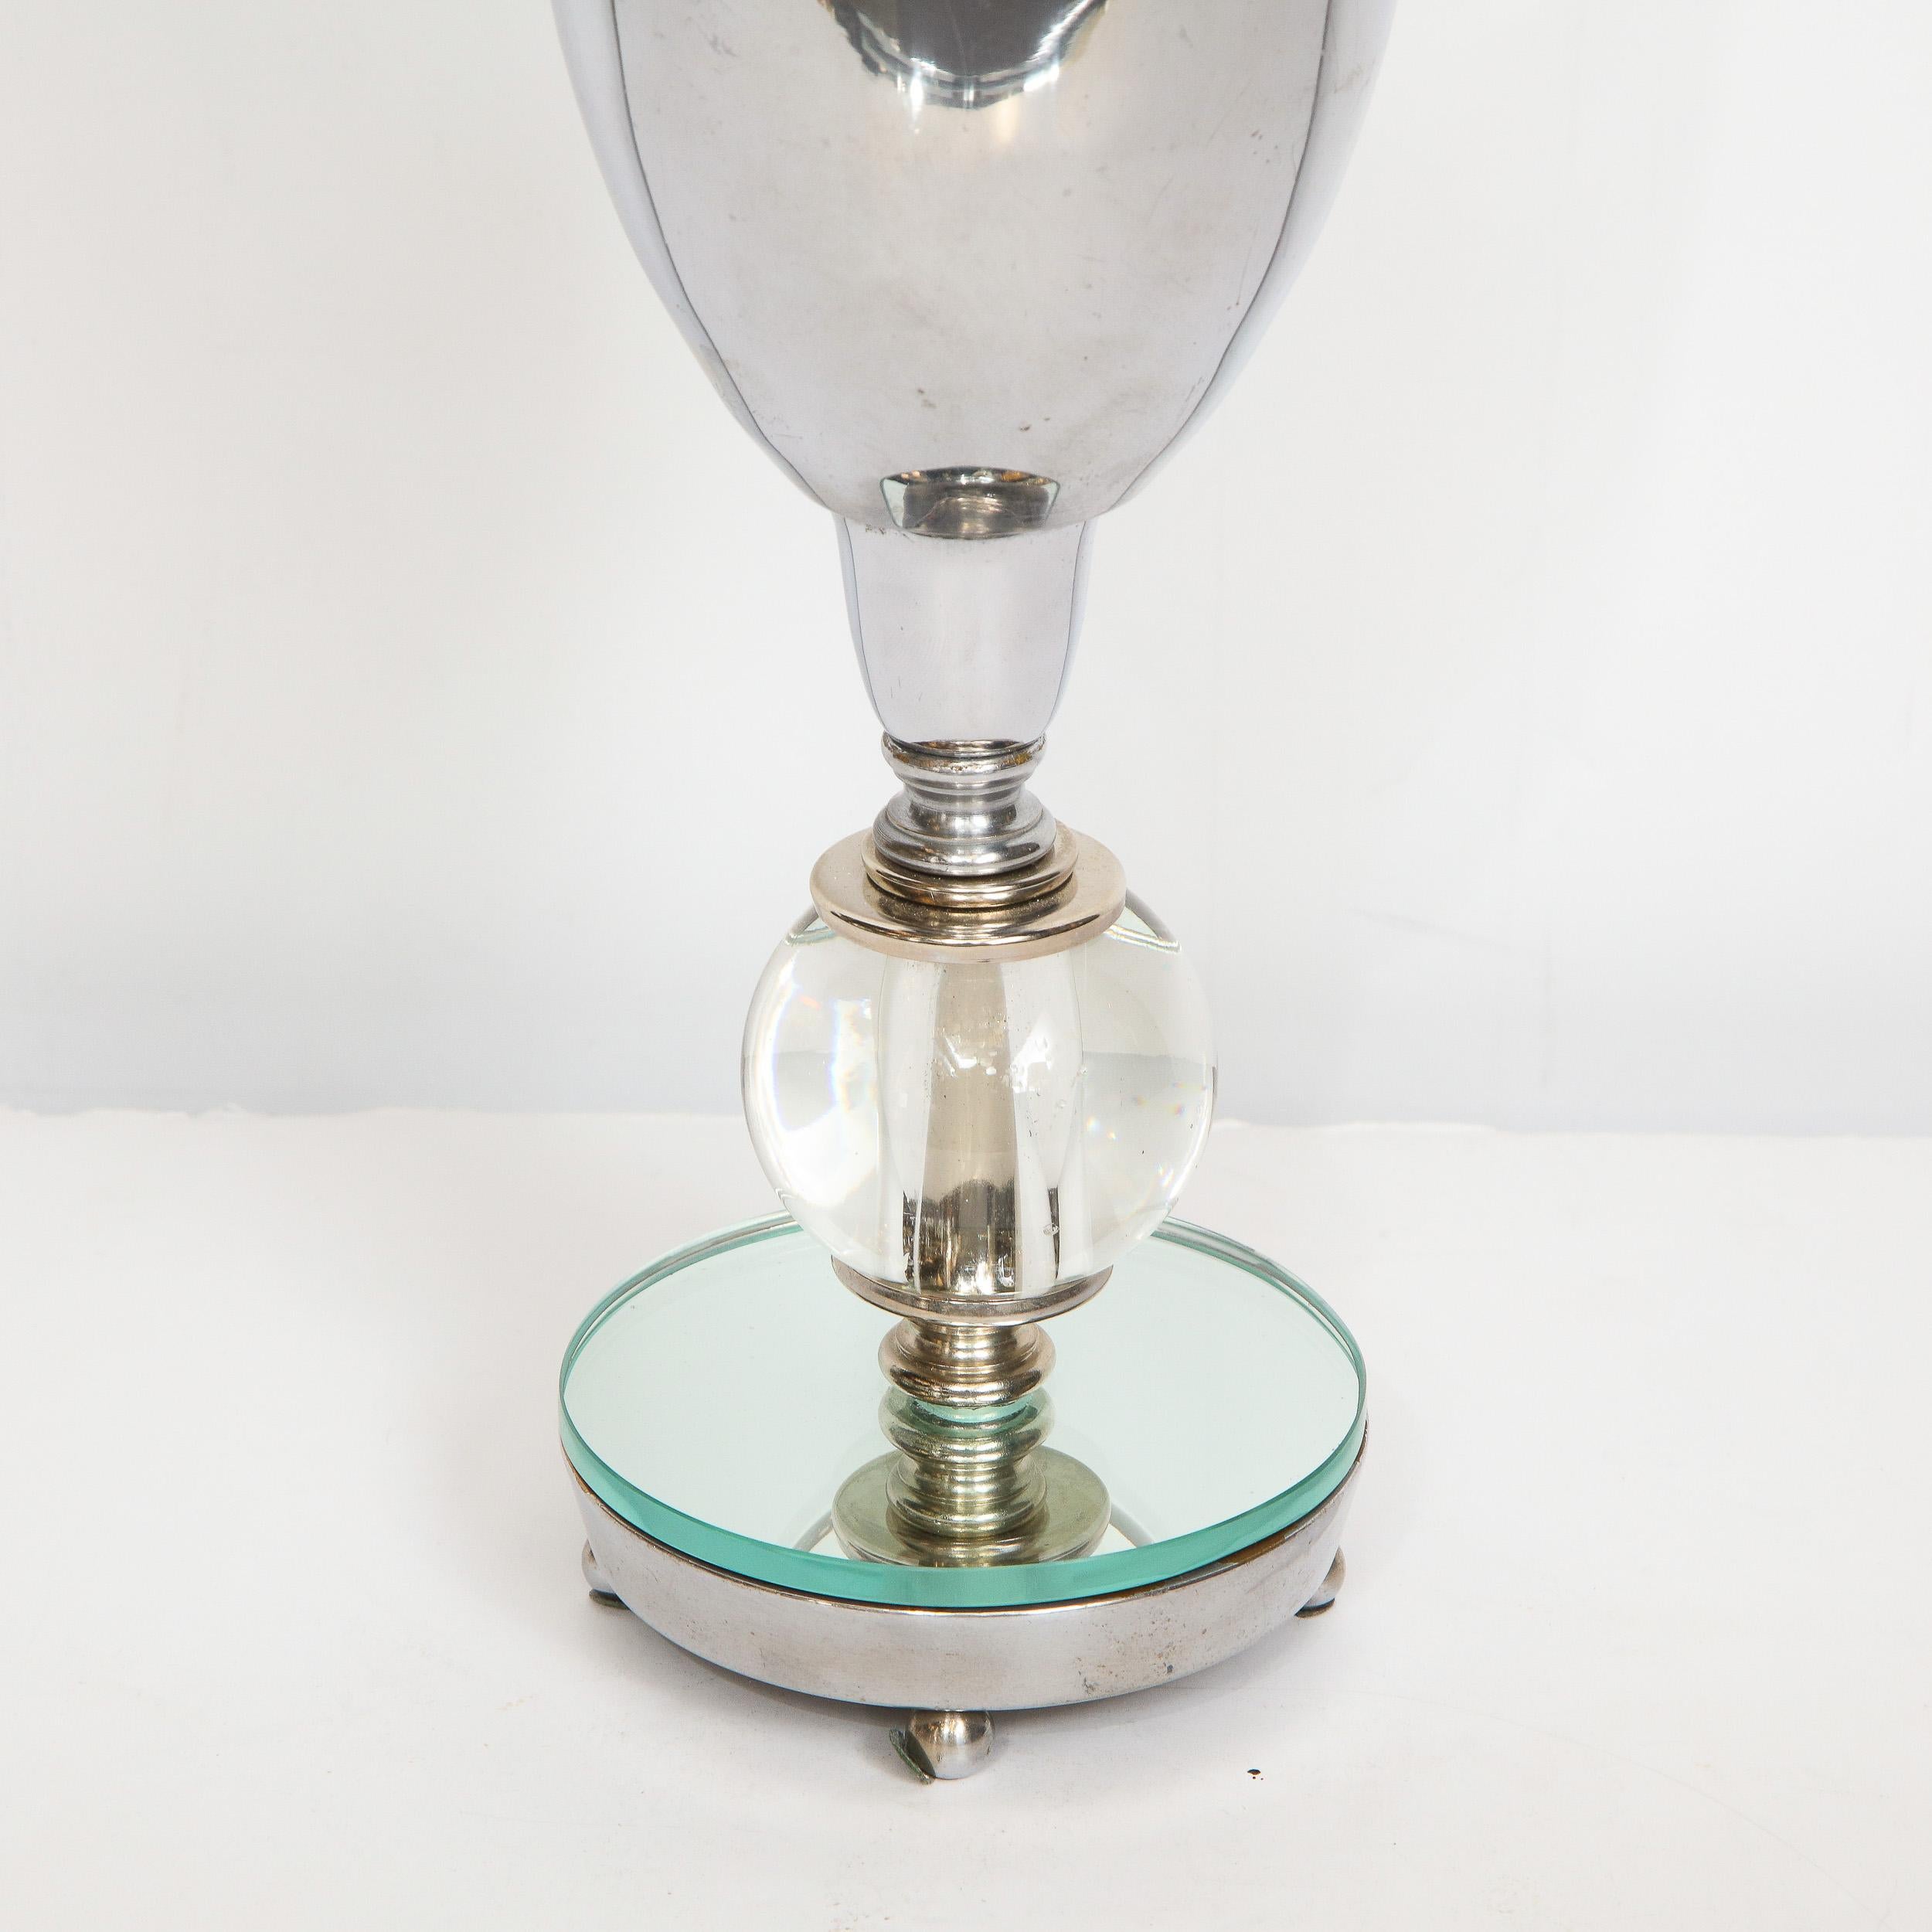 This glamorous Art Deco Machine Age uplight was realized in the United States, circa 1935. It features a chrome and mirrored base sitting on four ball feet. The body offers a translucent orbital embellishment in the center topped with skyscraper